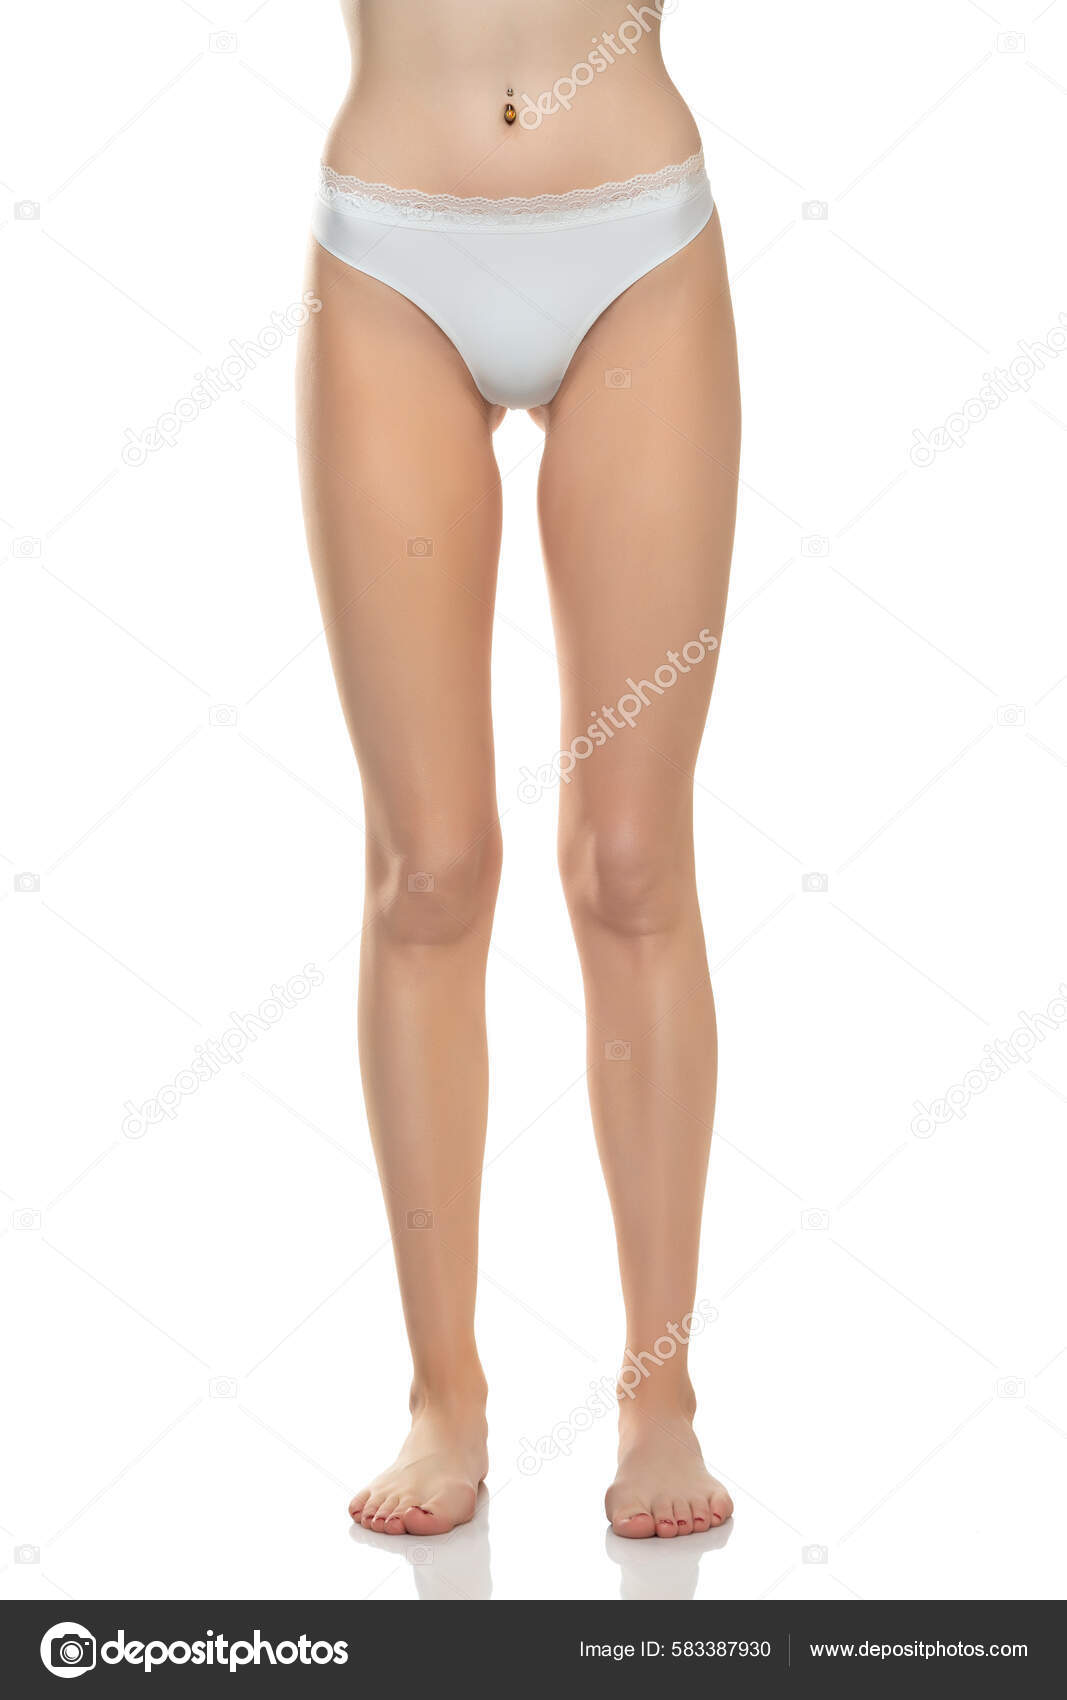 Mid section of woman wearing white briefs, front view on a blue background.  Stock Photo